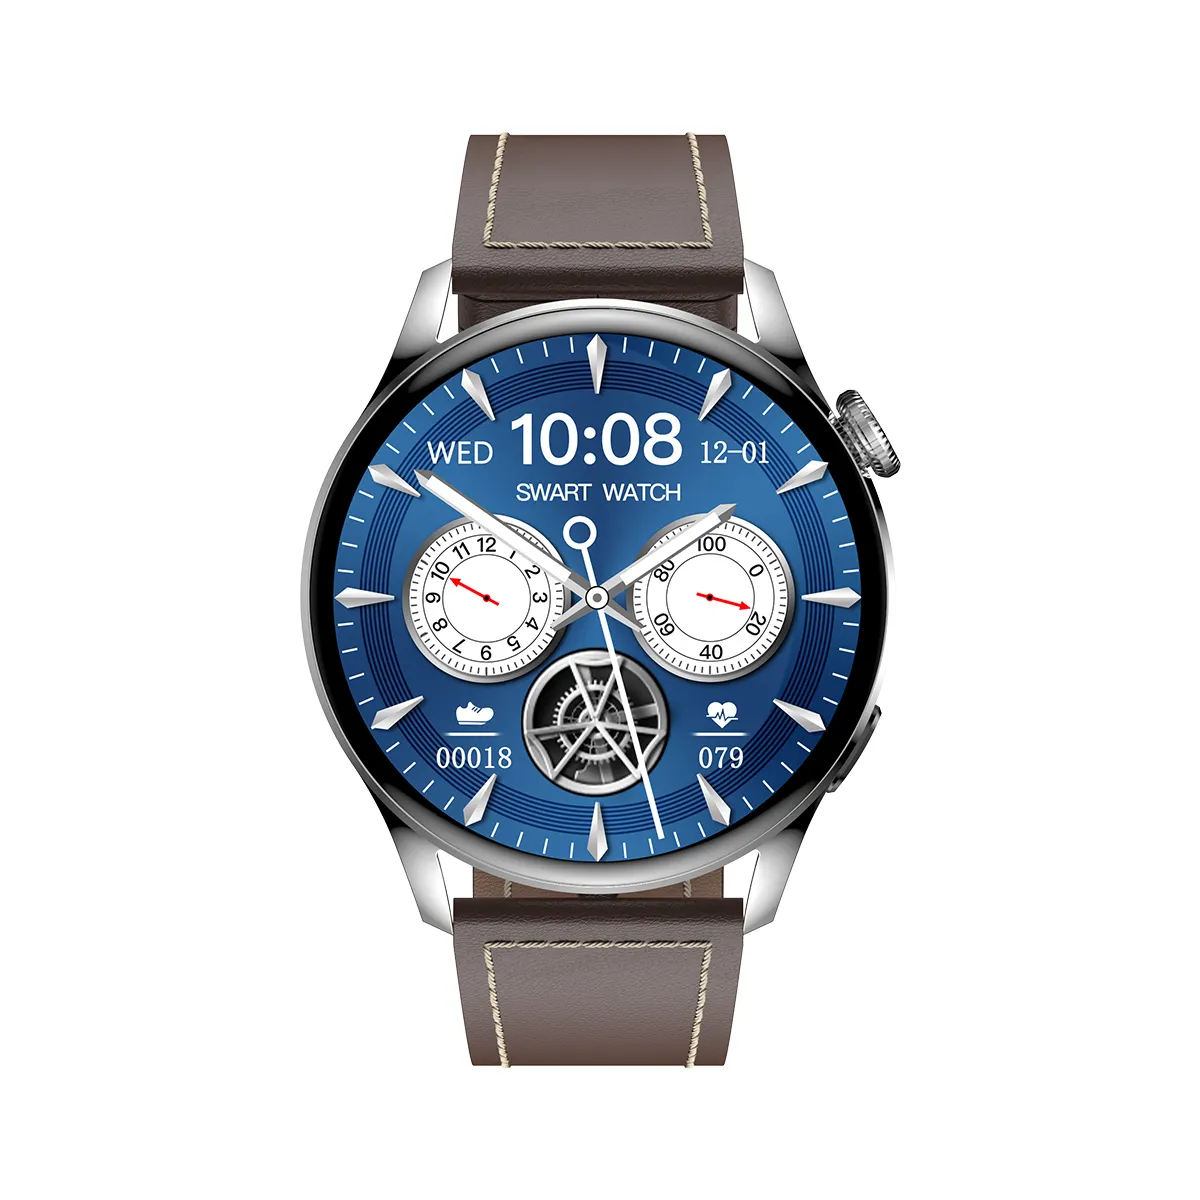 For HuaWei Smart Watch IP68 Waterproof Explosion Proof Glass Screen Watch For Men Android Smart Watch